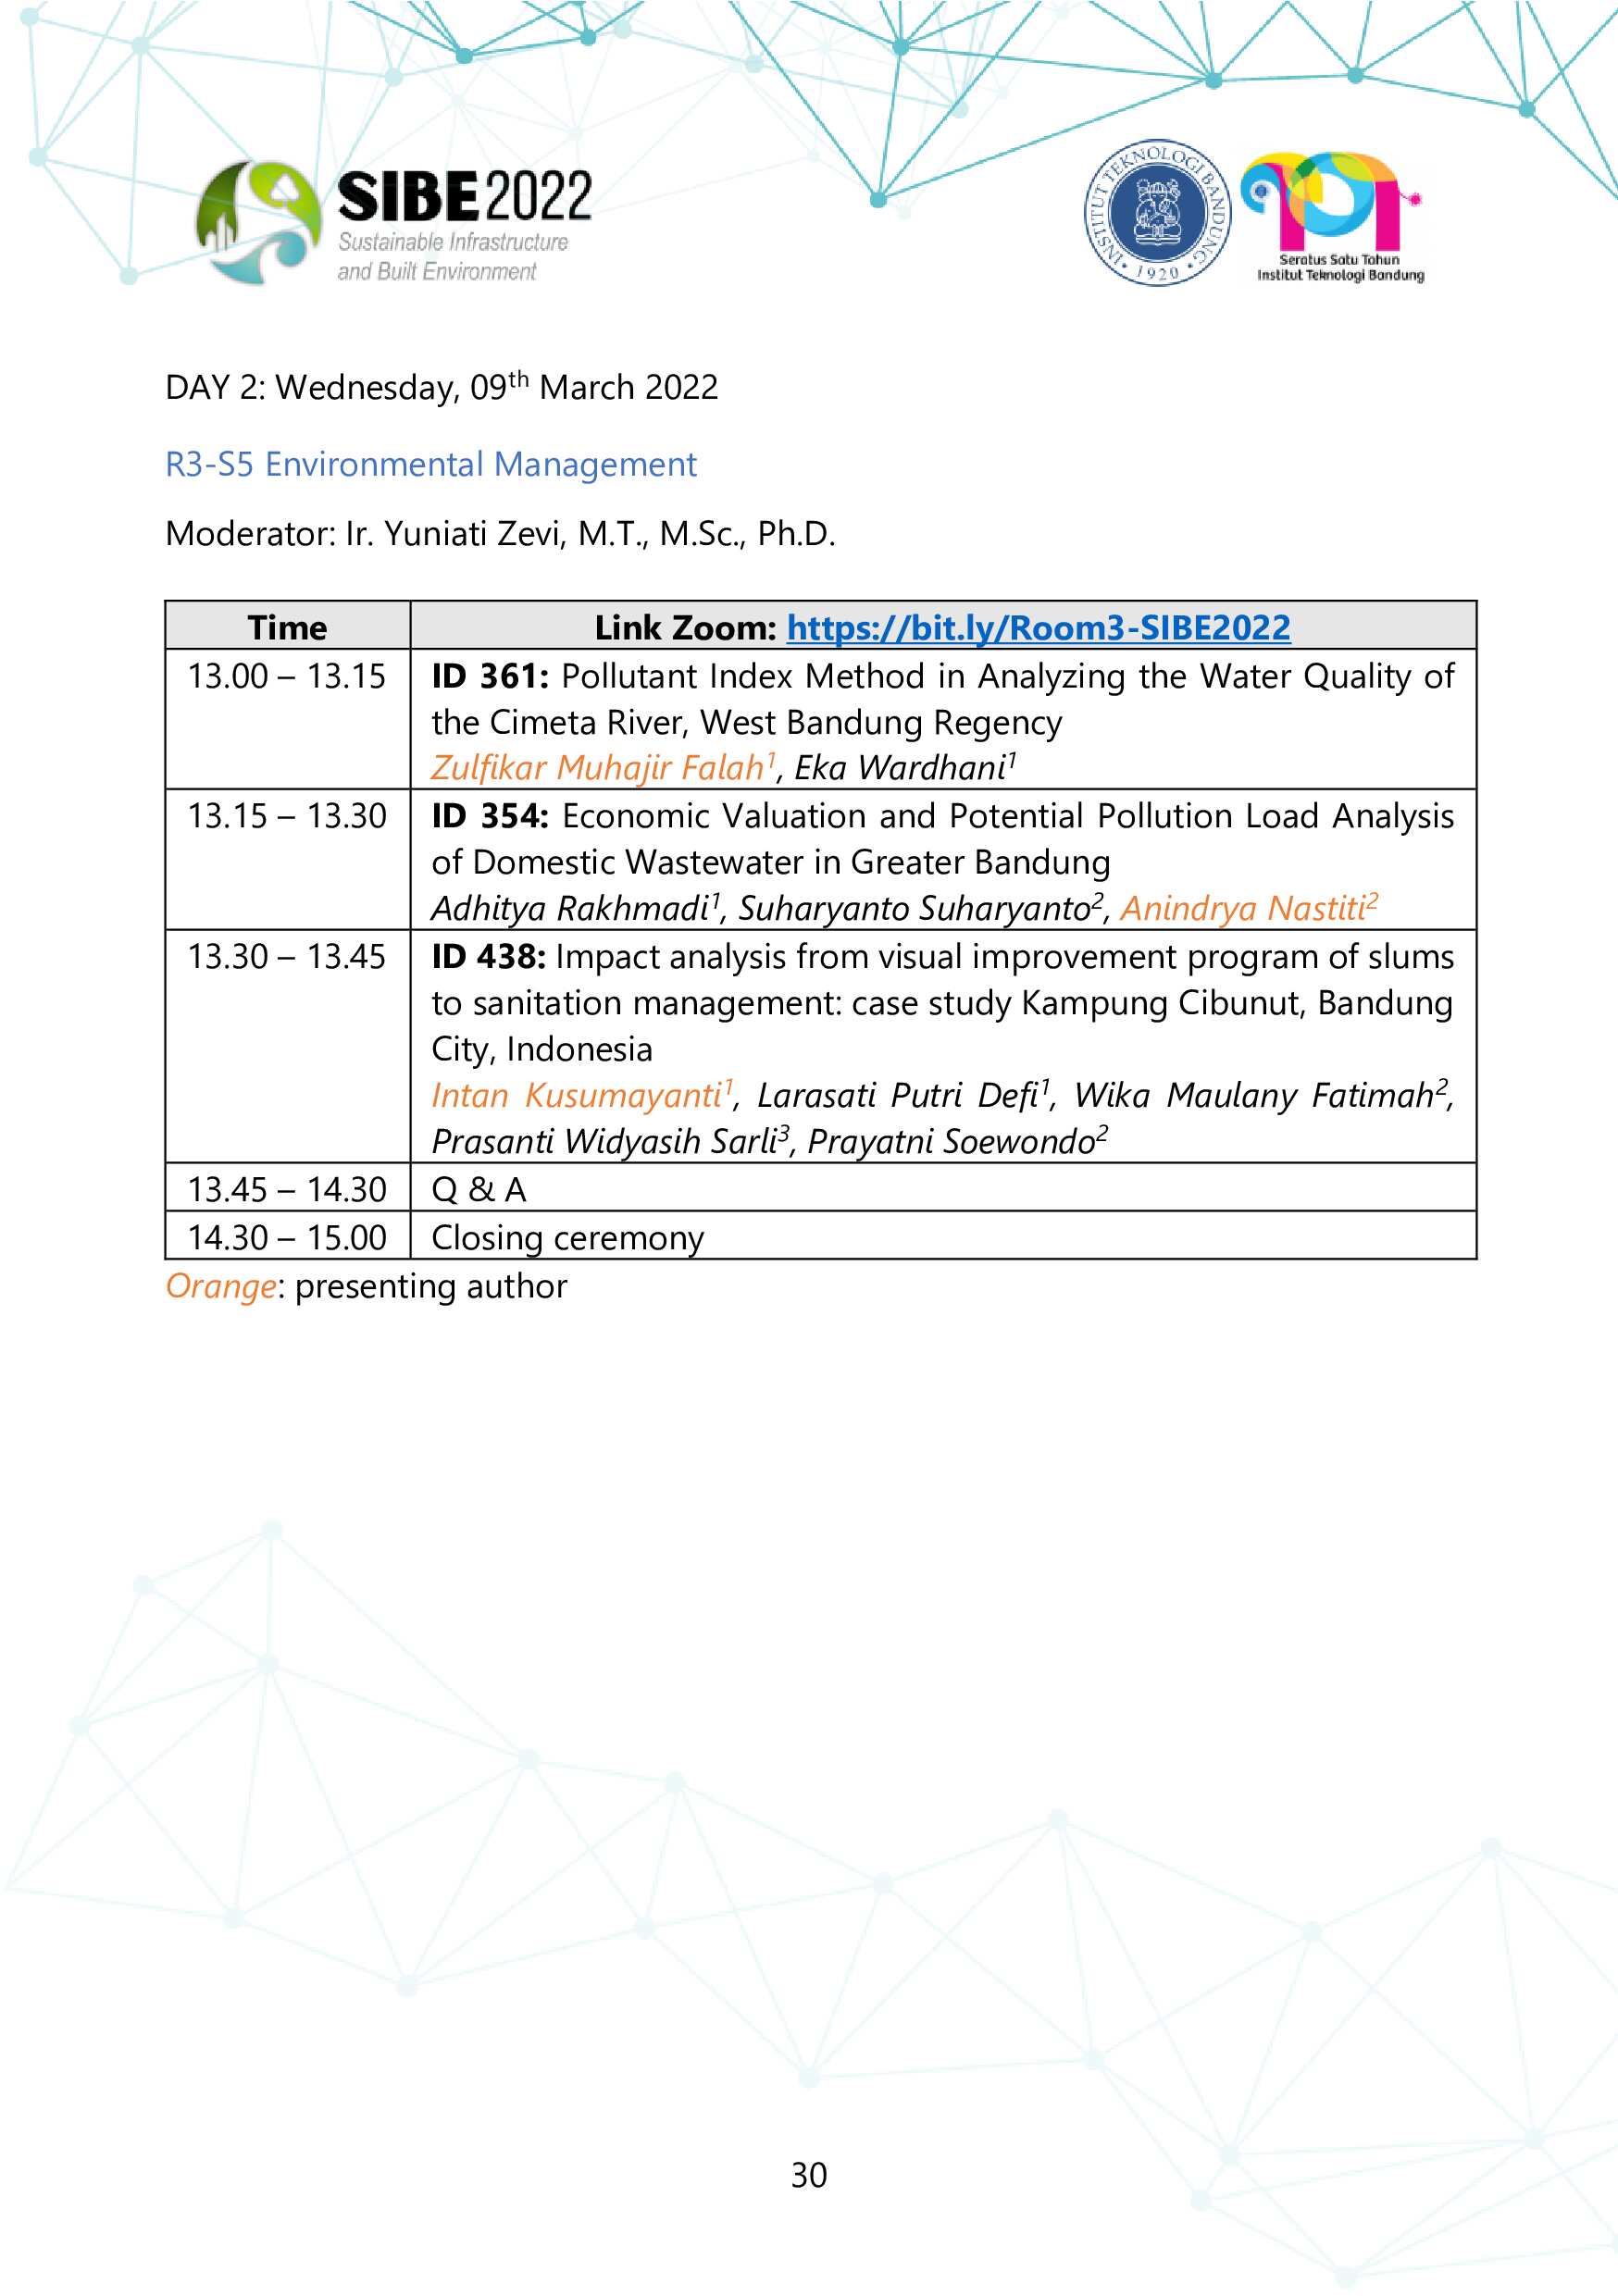 SIBE 2022 Program Schedule 8-9 March 2022-29